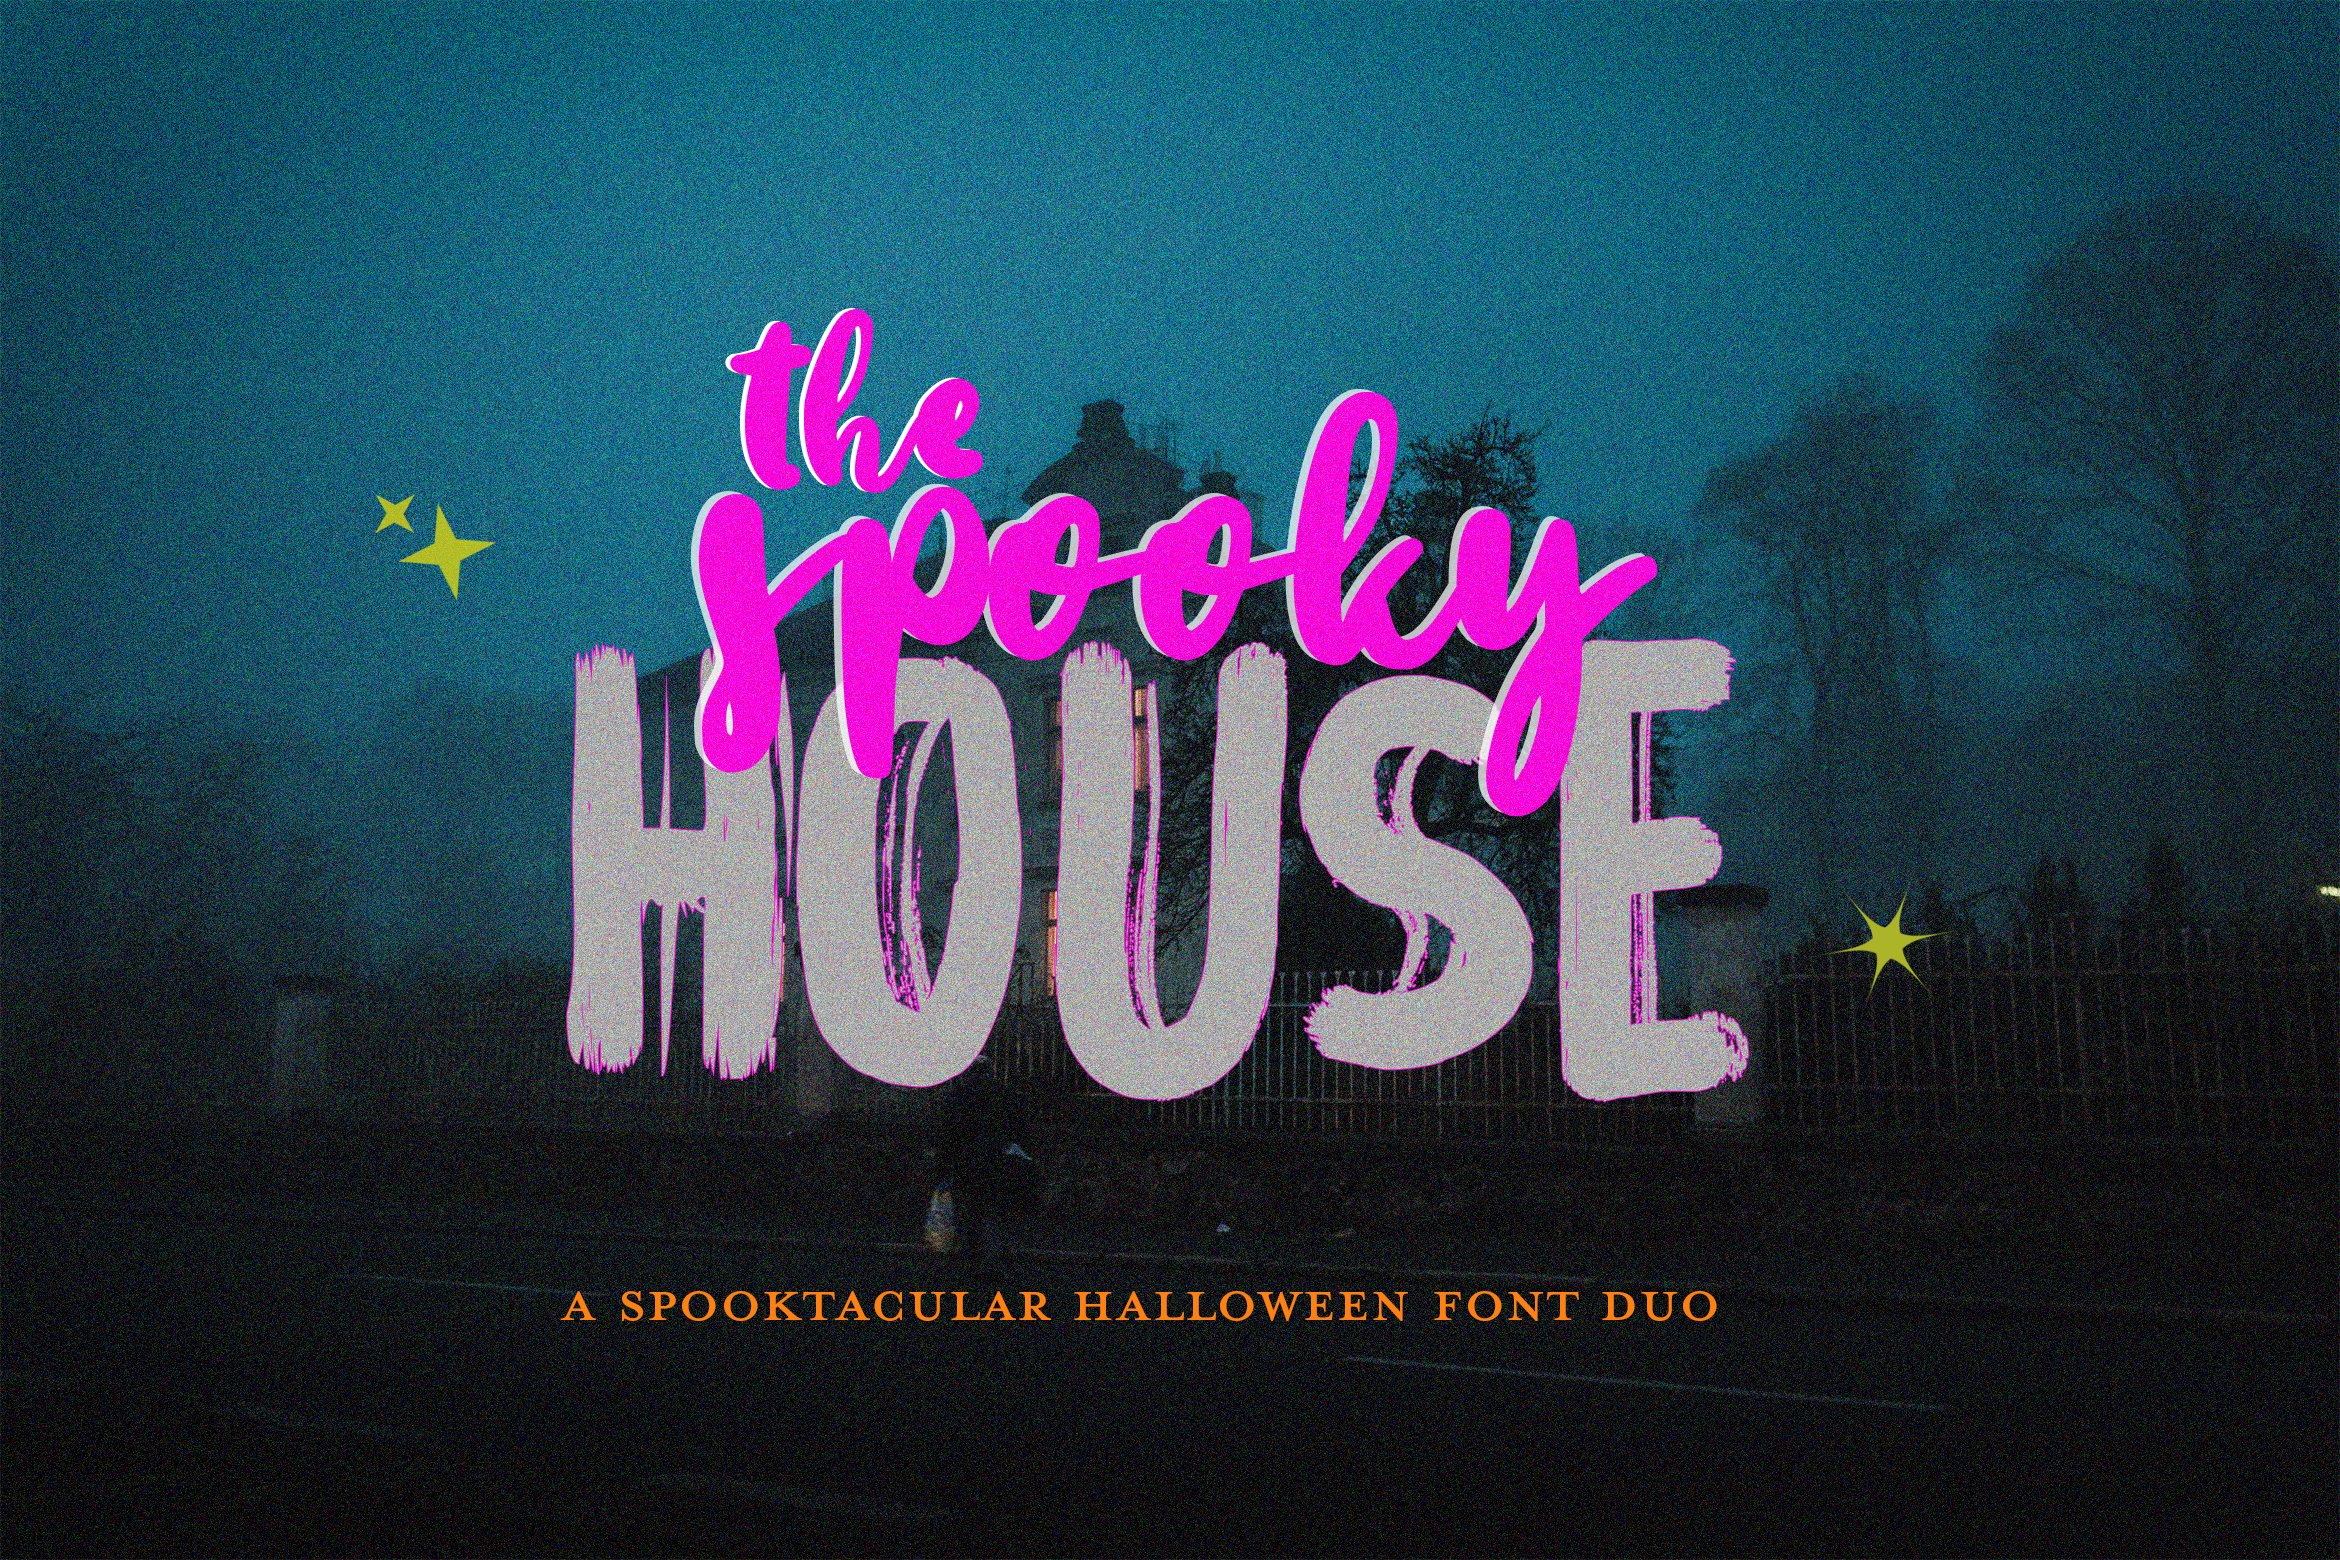 The Spooky House Font Duo cover image.